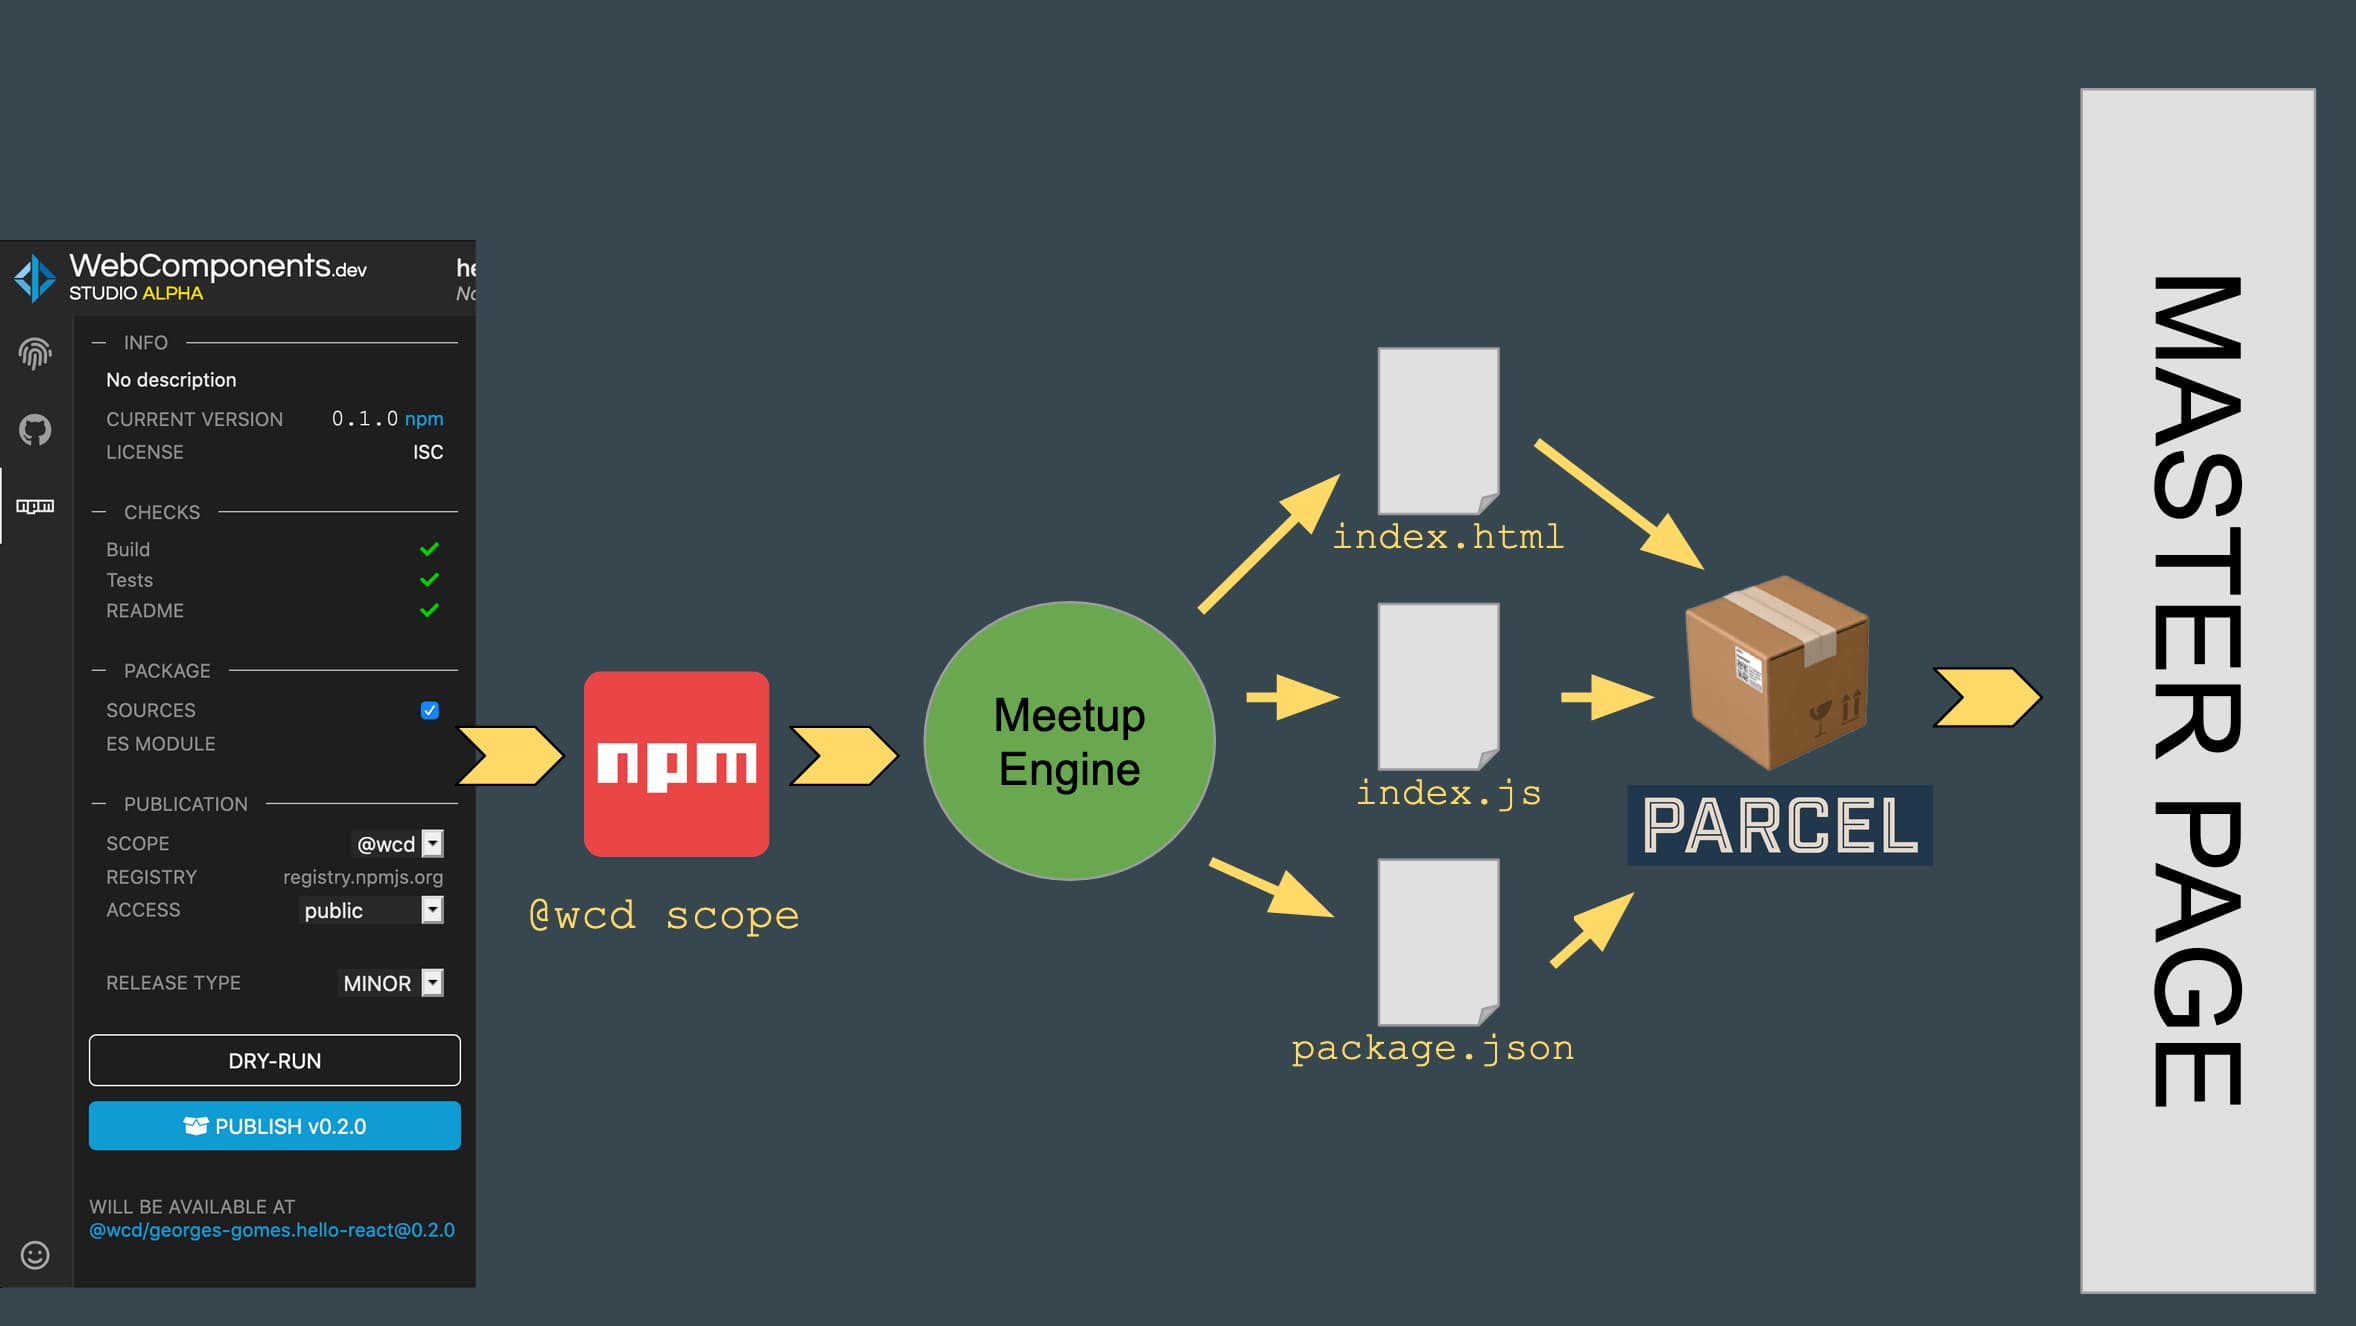 schema of the architecture, npm to meetup engine to files to parcel